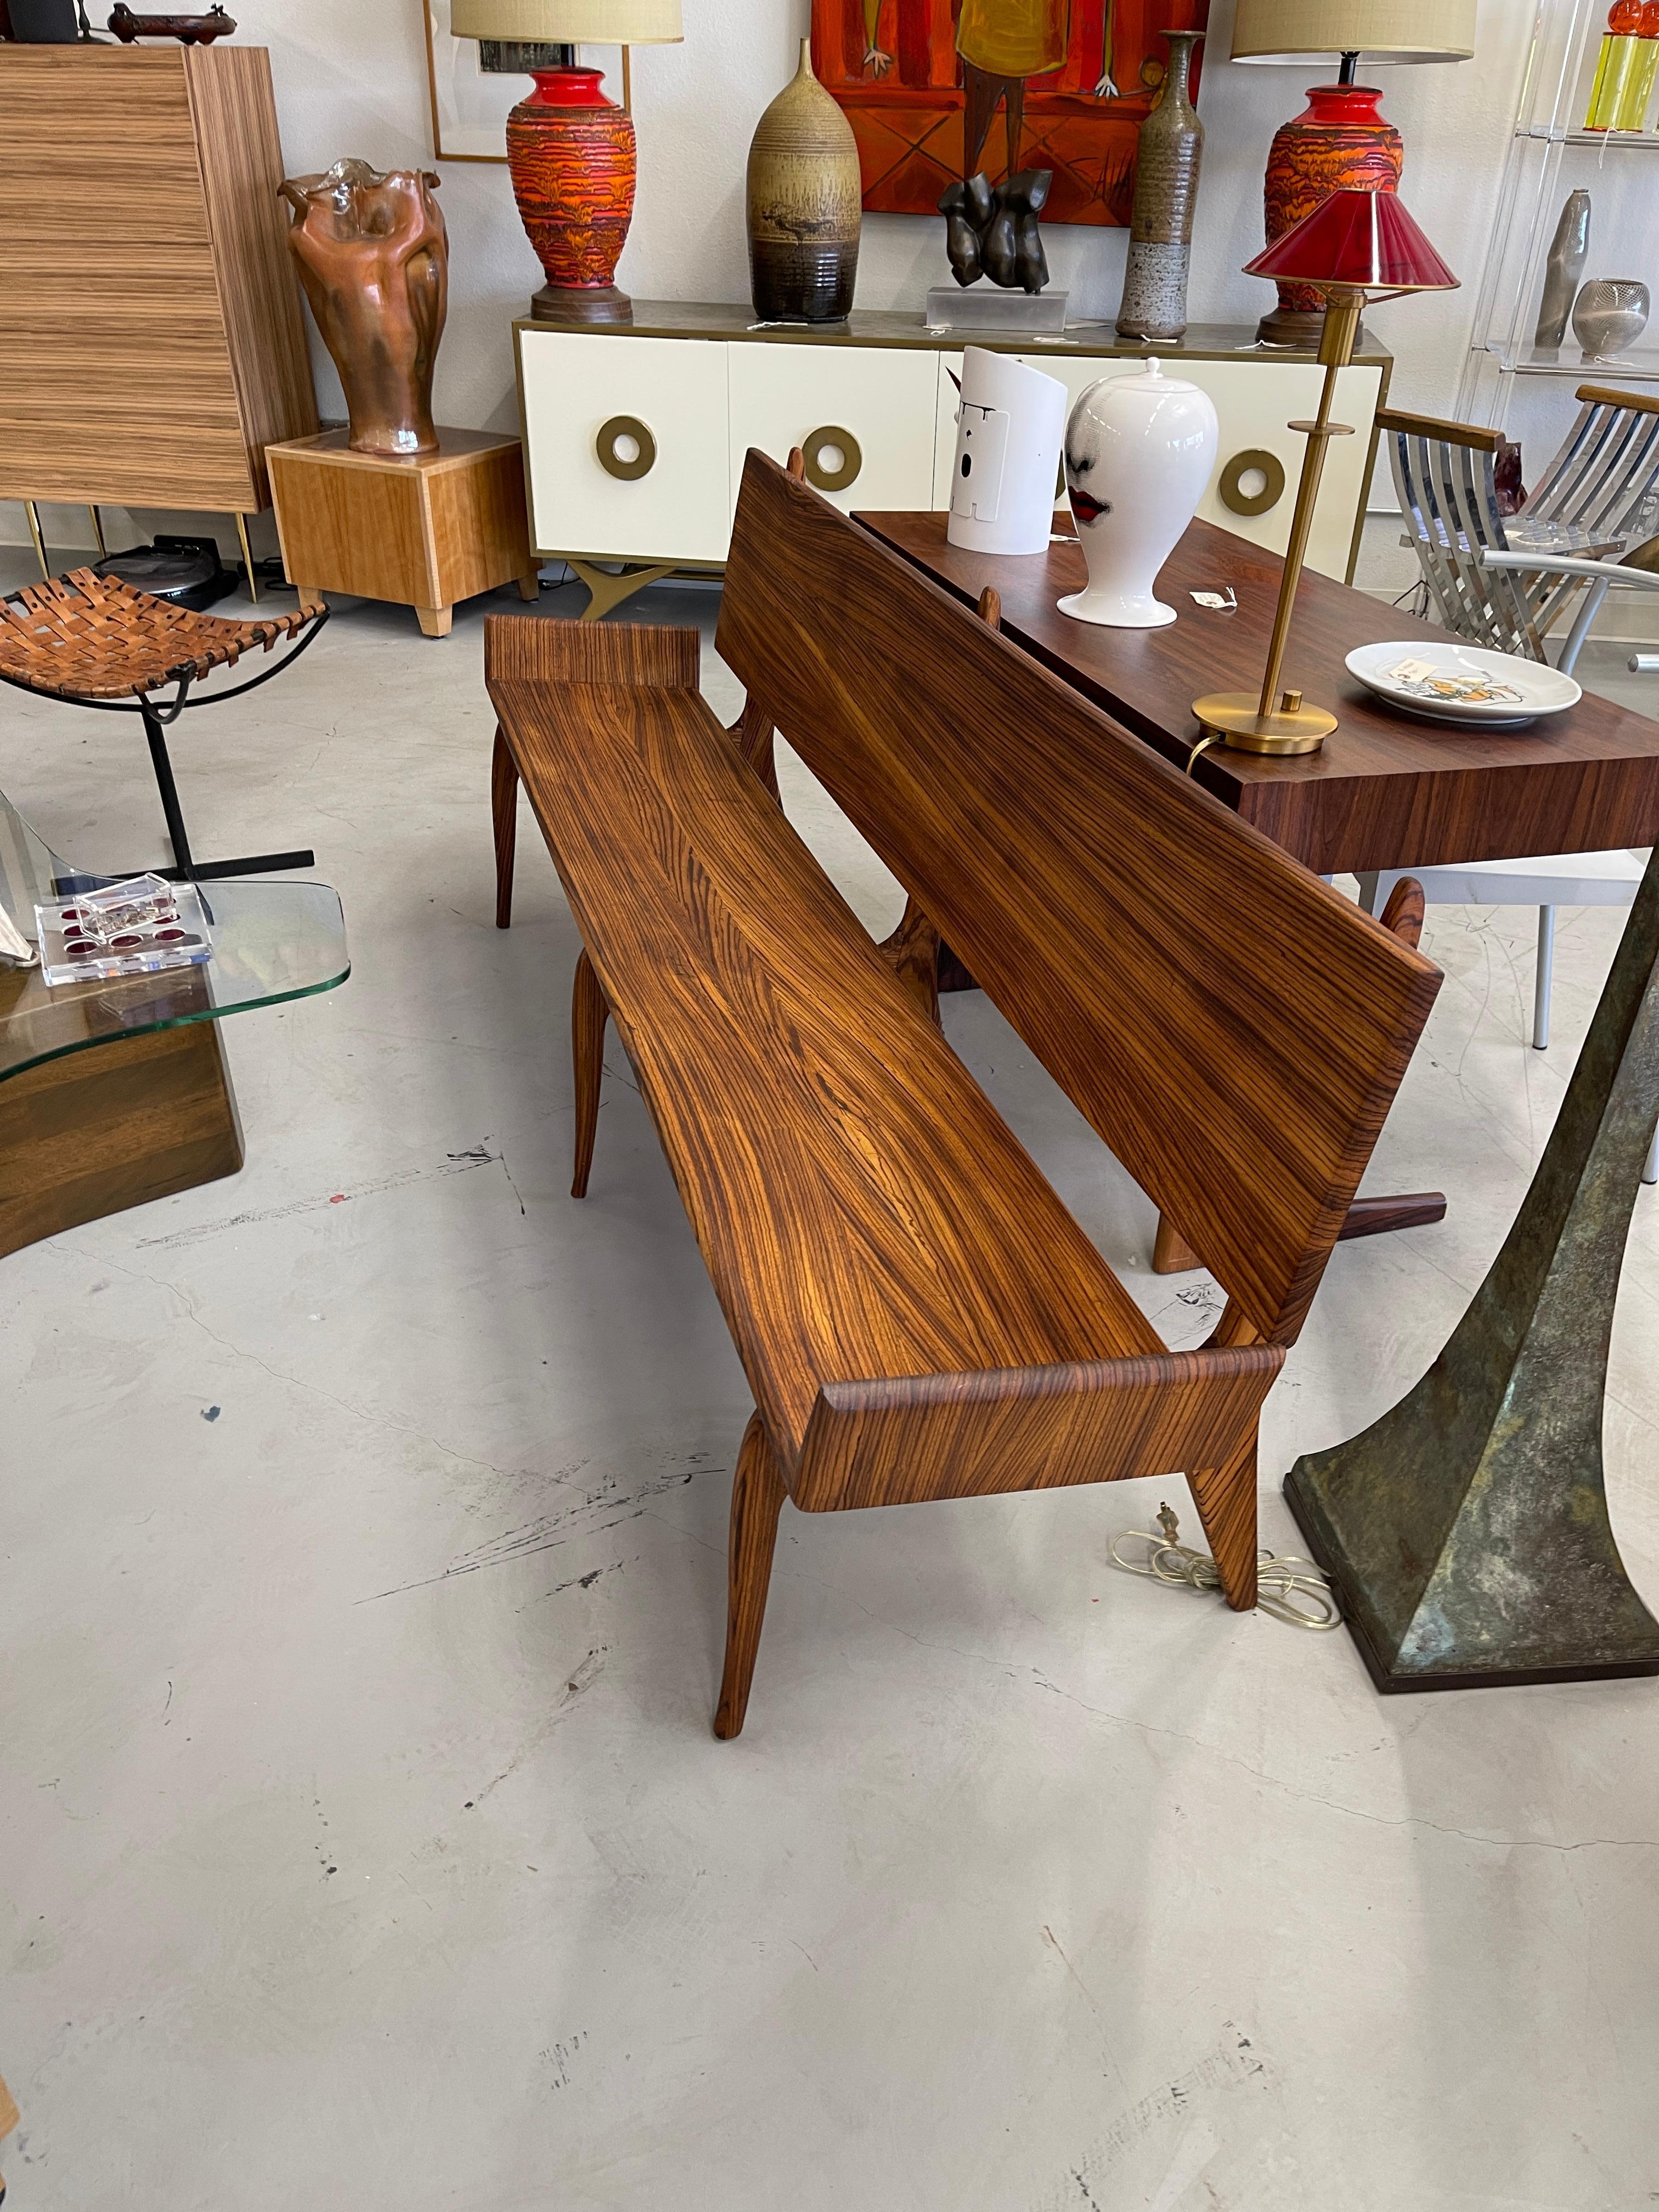 Stunning artisan craftsman solid Zebra wood bench. No veneer with all solid exotic wood bench and beautiful graining. Nice styling with elegant lines. The bench has been re-glued and tightened. Likely late 20th century. The center bottom support is